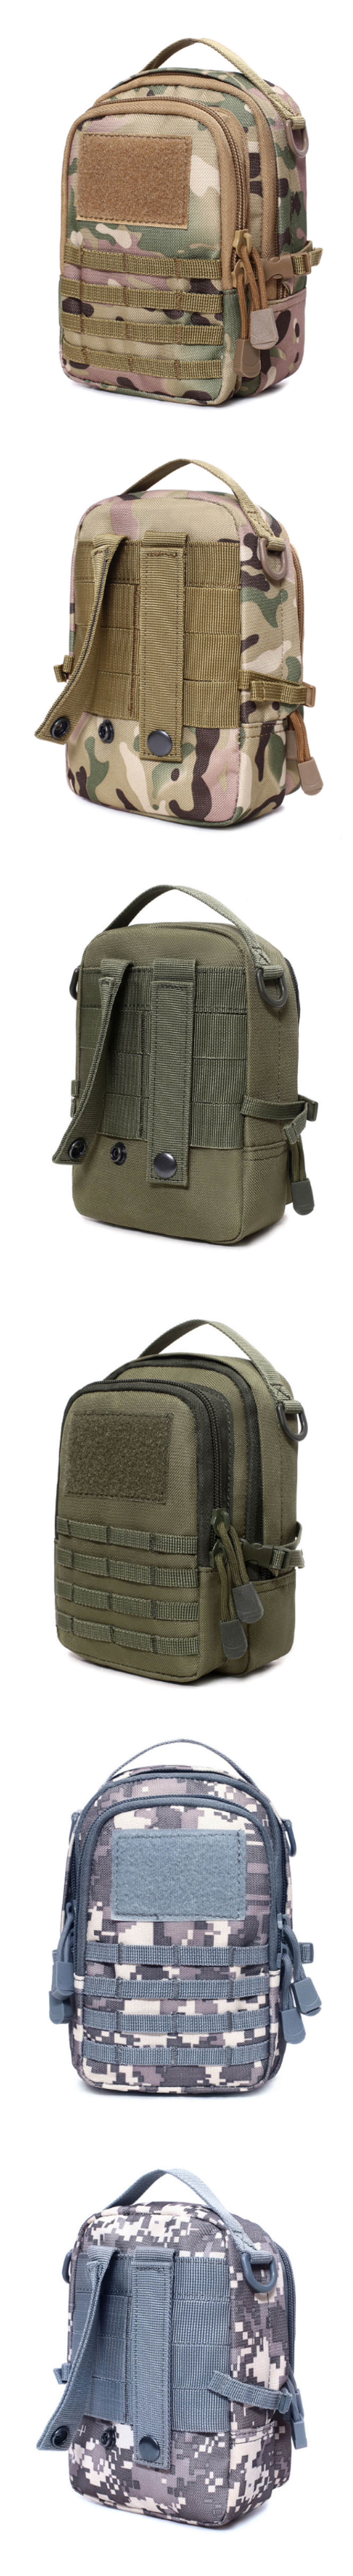 8-Nylon-Tactical-Molle-Phone-Pouch-Waist-Pack-Bag-Combat-Military-EDC-Gadget-Hunting-Pouch-Outdoor-C-1748911-3